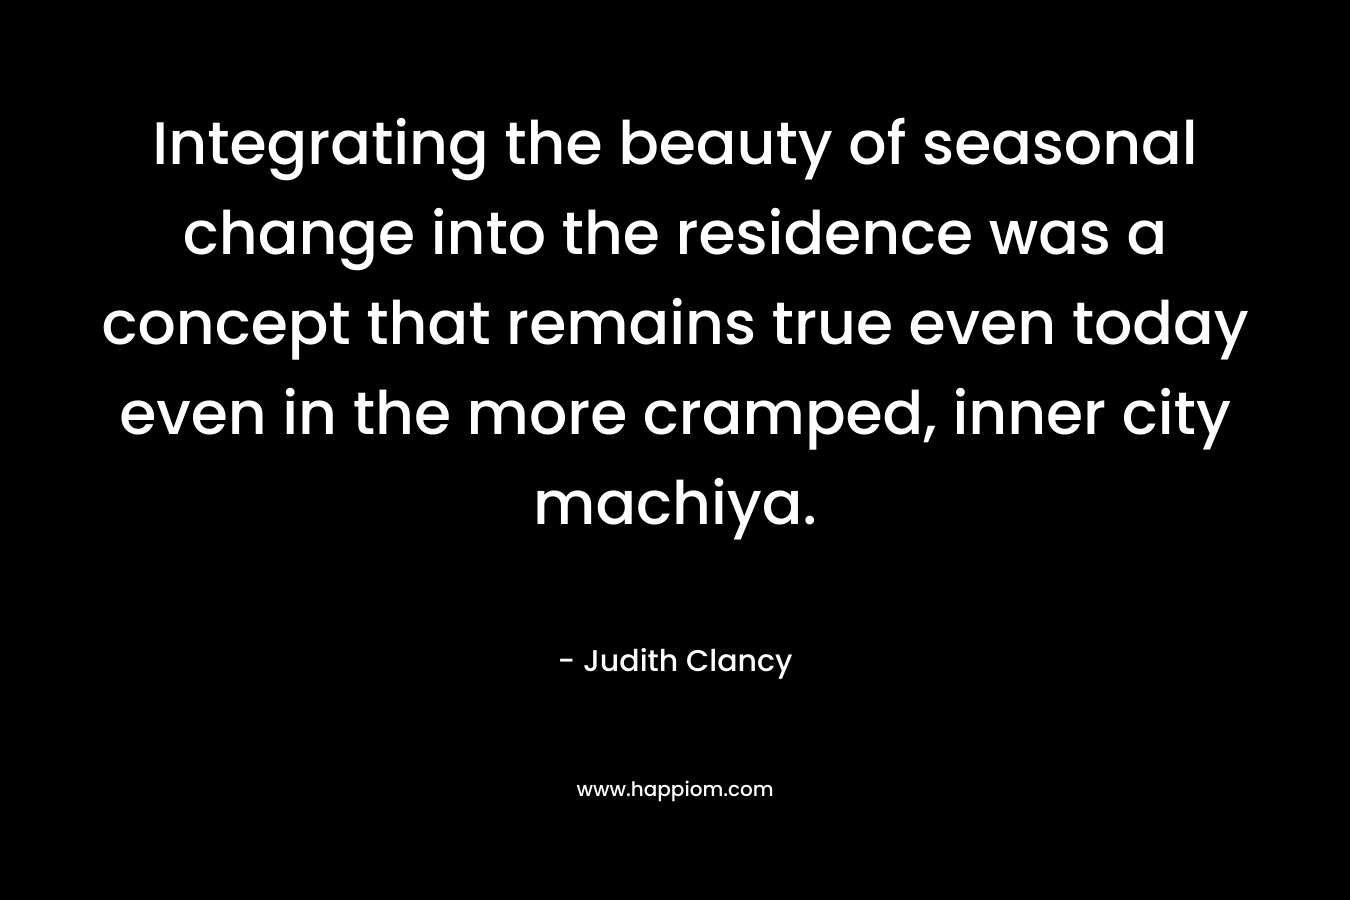 Integrating the beauty of seasonal change into the residence was a concept that remains true even today even in the more cramped, inner city machiya. – Judith Clancy